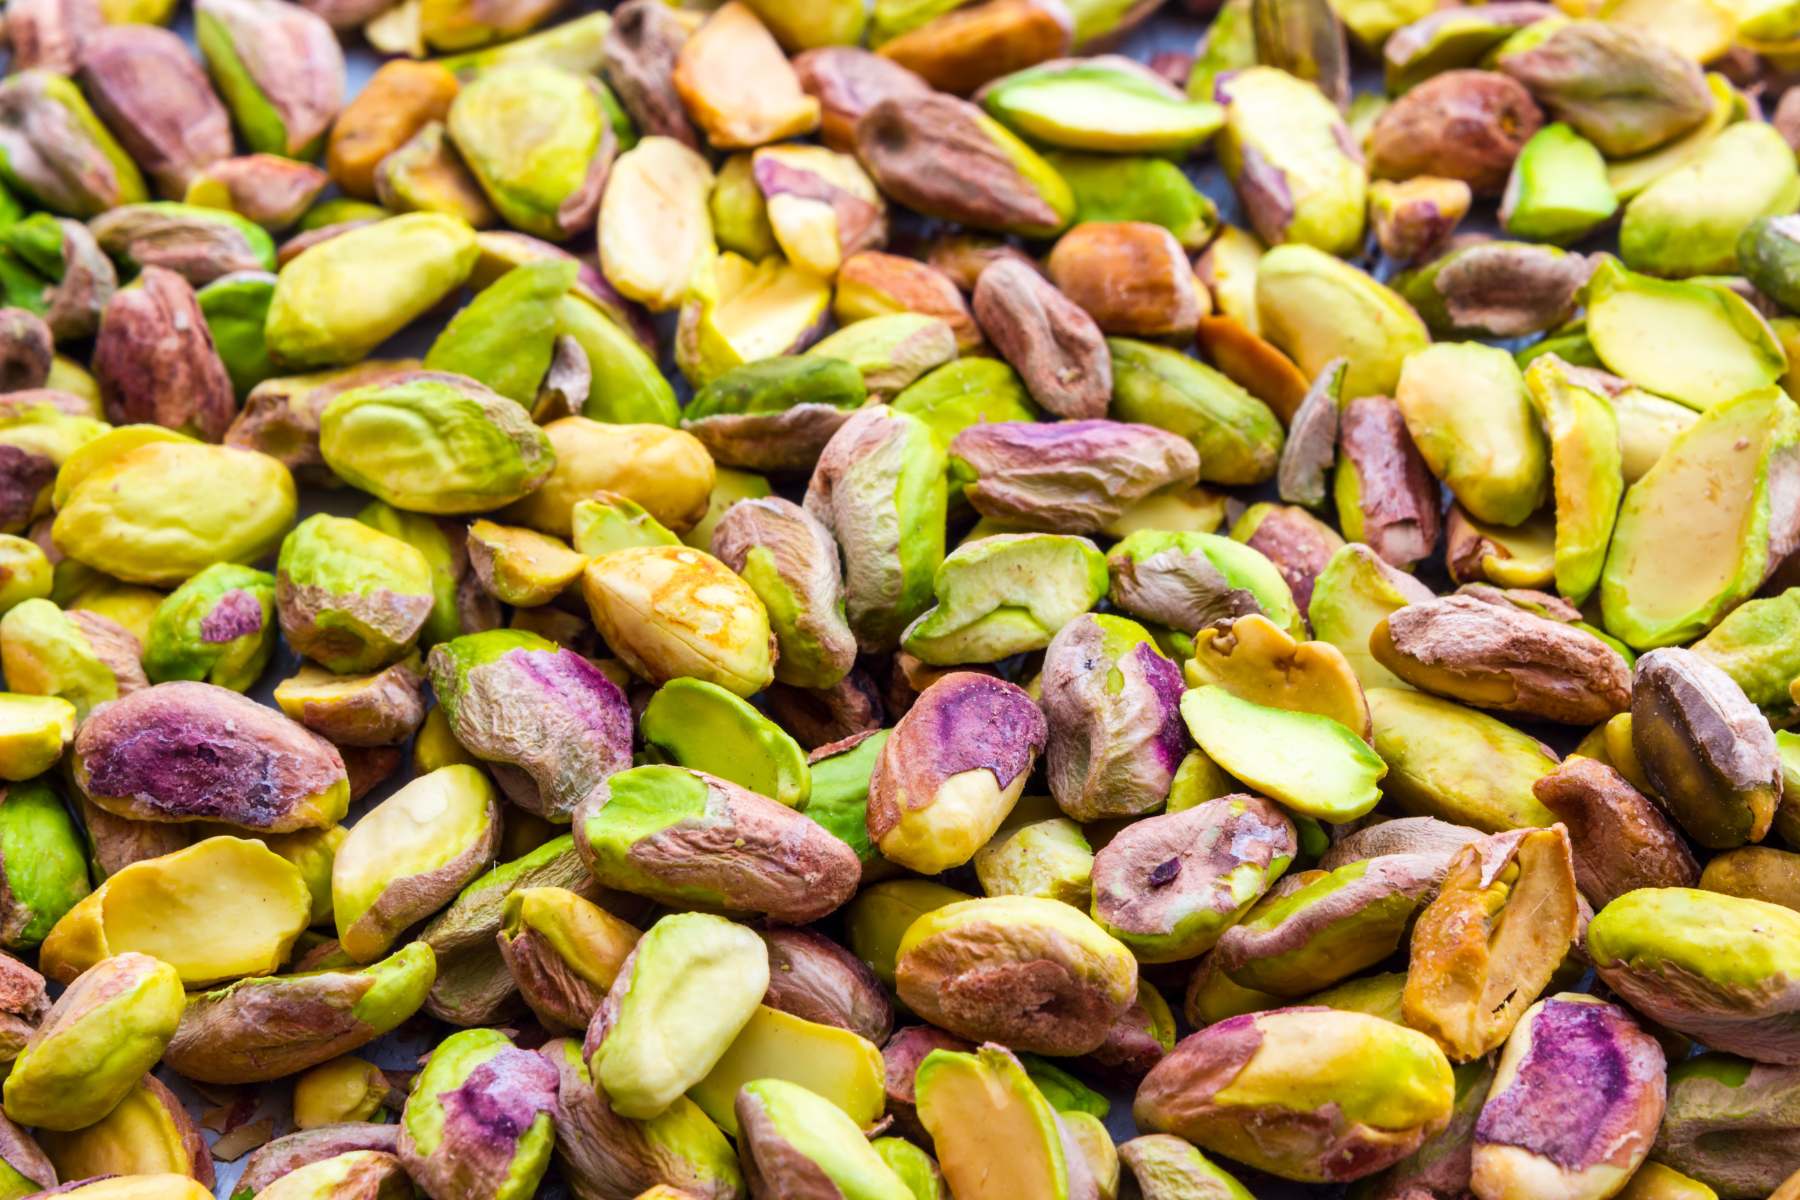 A close-up view of shelled pistachios ready for use in a pistachio nut butter recipe.